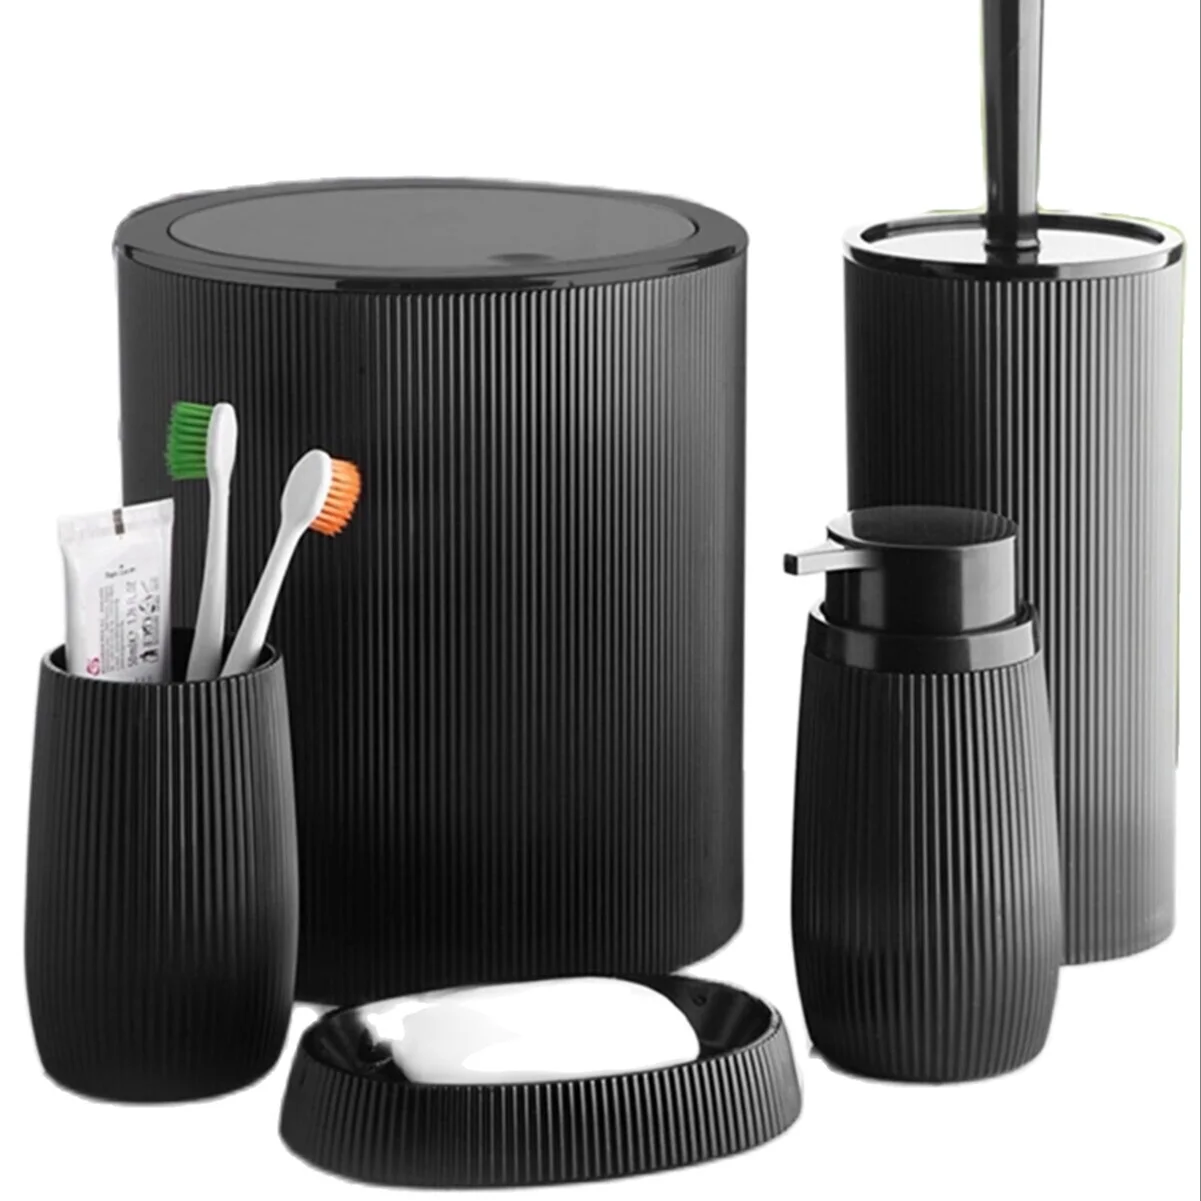 Striped Round 5'li Bathroom Set Toothbrush Cup Soap Dispenser Toilet Brush Trash can Plastic New Quality Modern Color Toilet